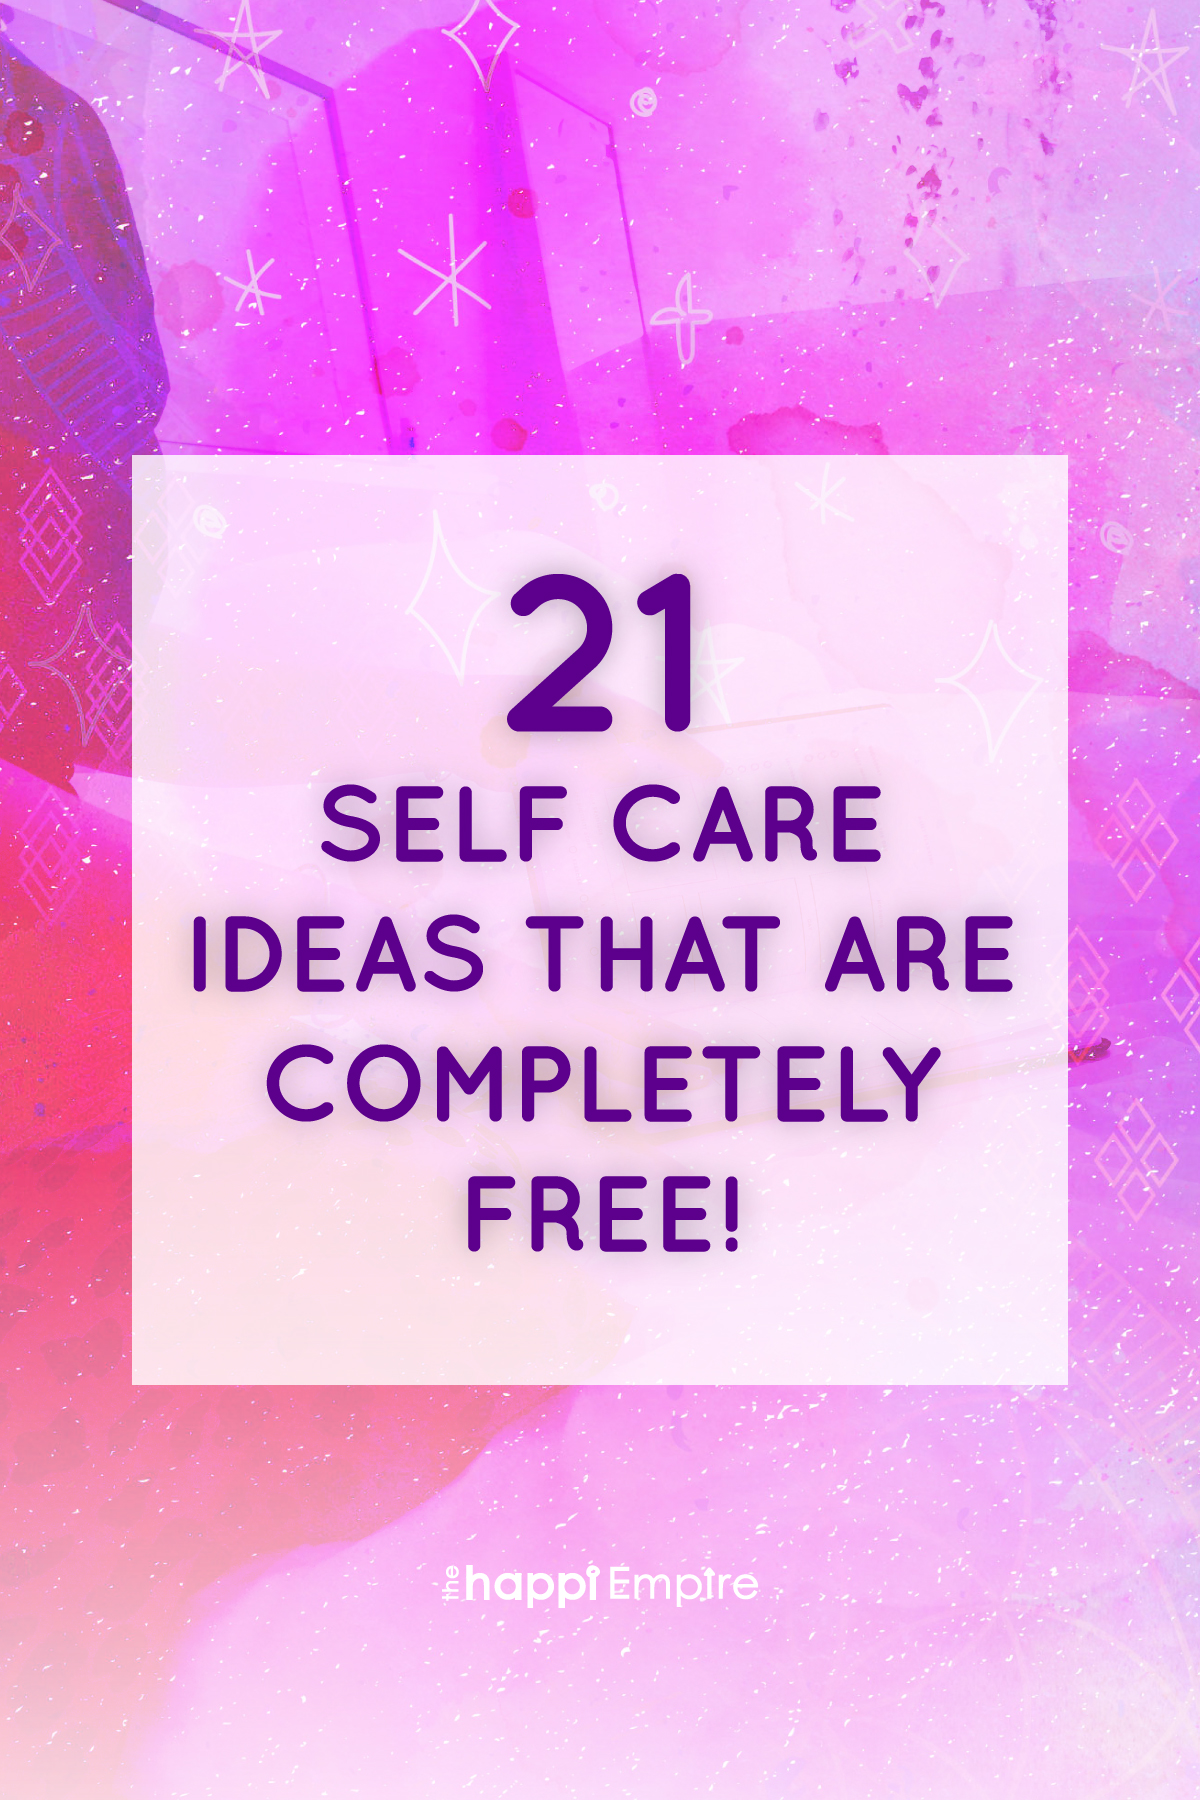 21 self care ideas that are completely free!